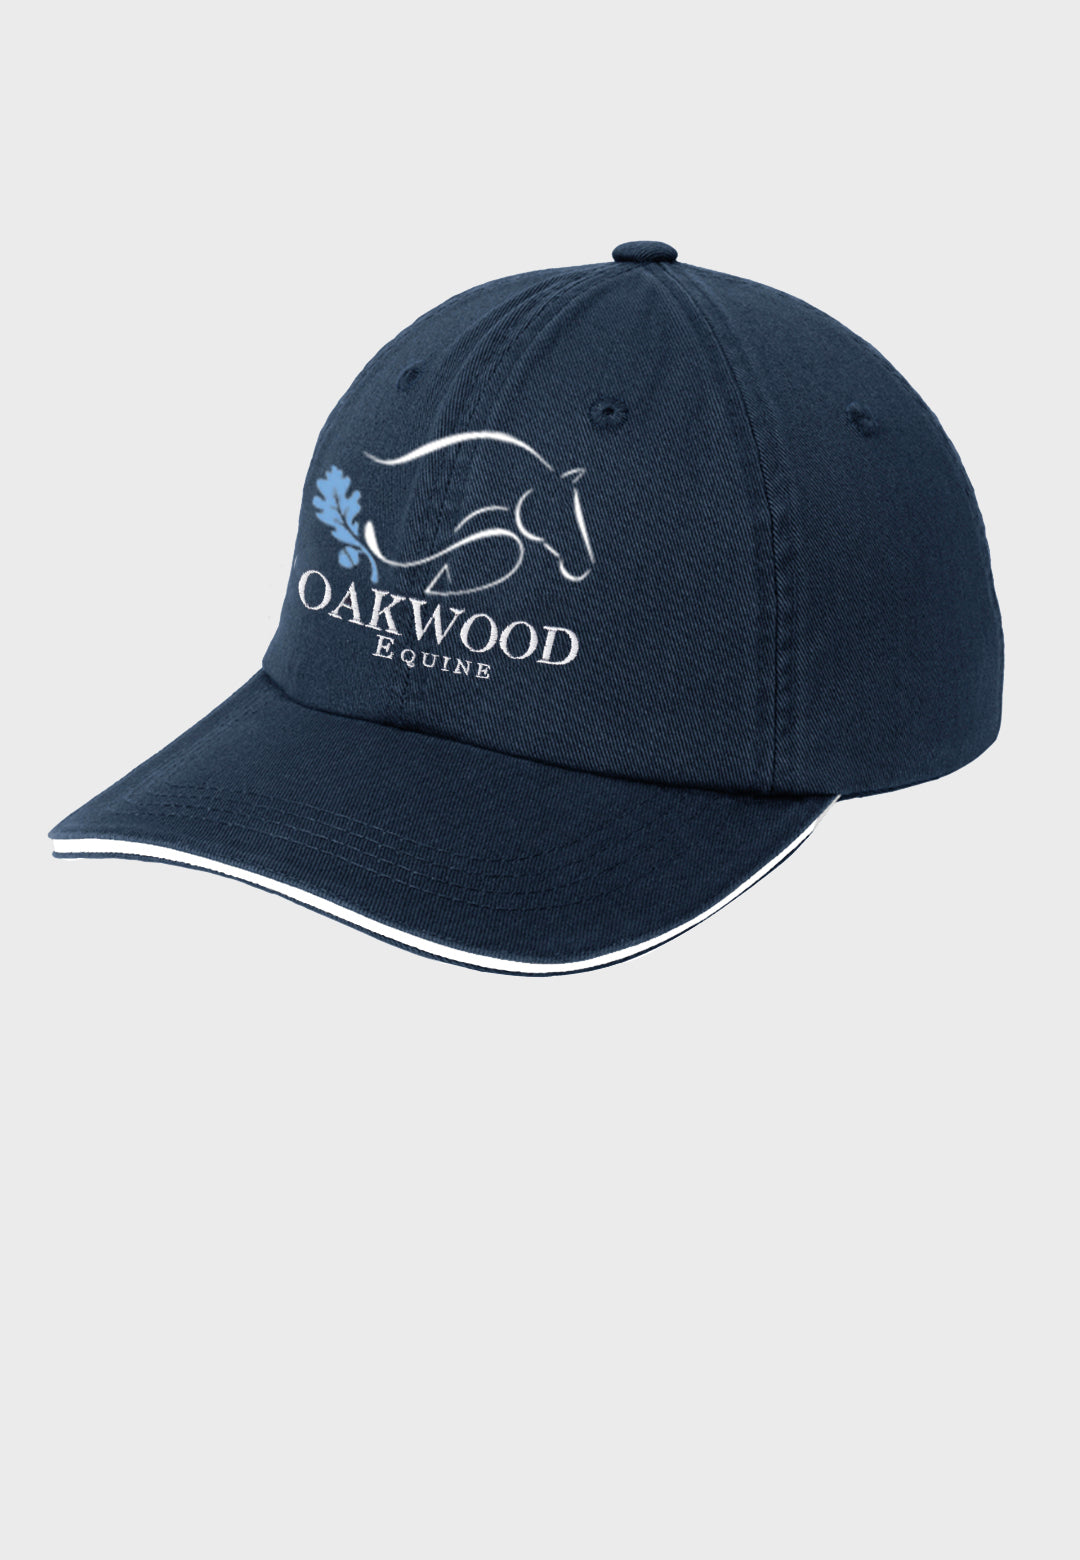 Oakwood Equine Port Authority® Sandwich Bill Cap with Striped Closure